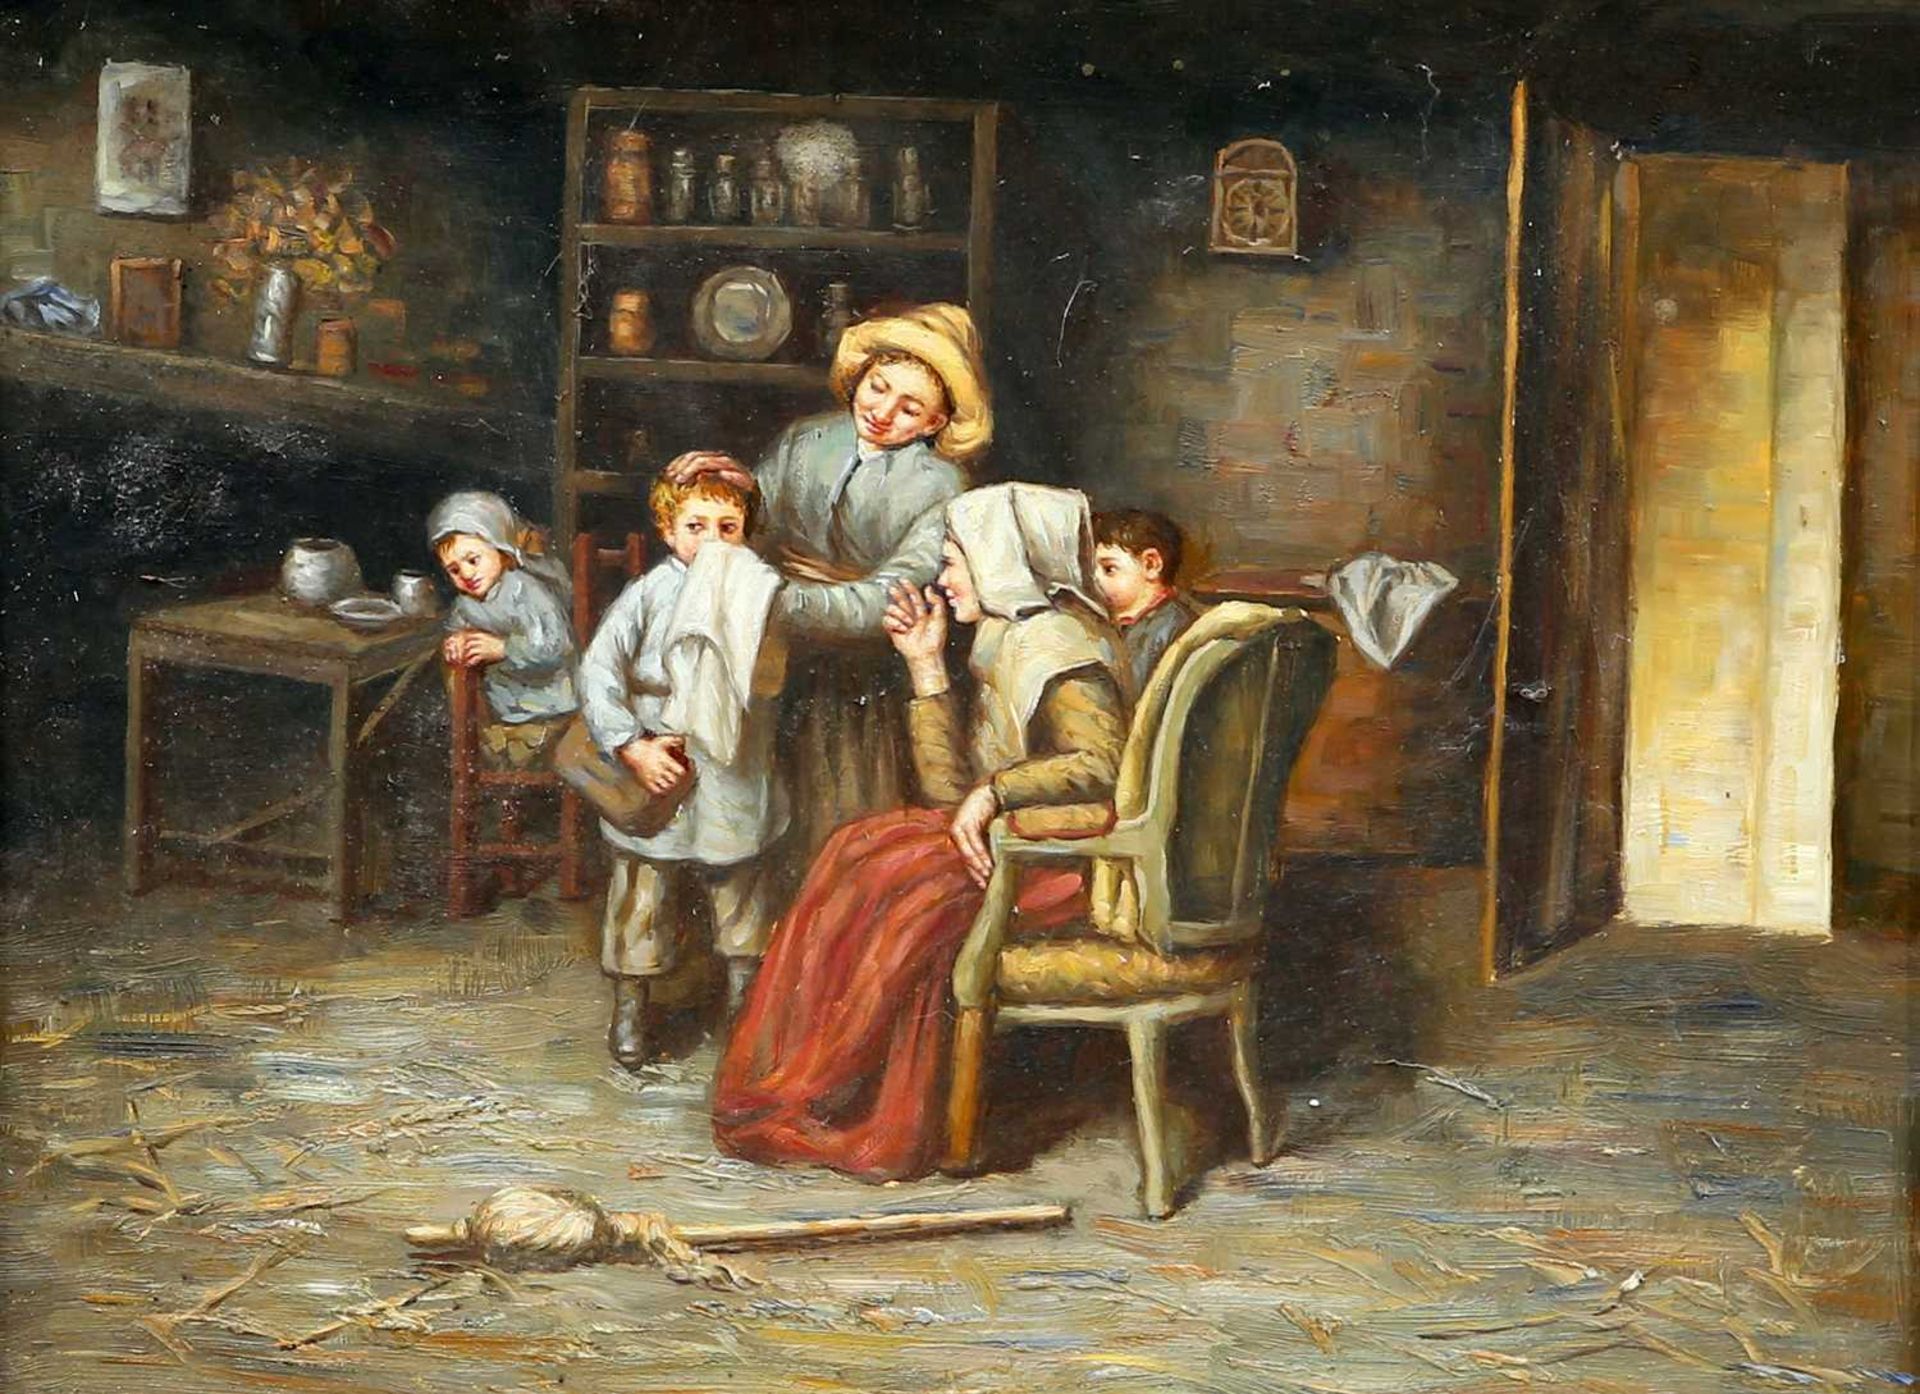 EARLY 20TH CENTURY BRITISH SCHOOL COTTAGE INTERIOR AND PORTRAIT OF A MAN